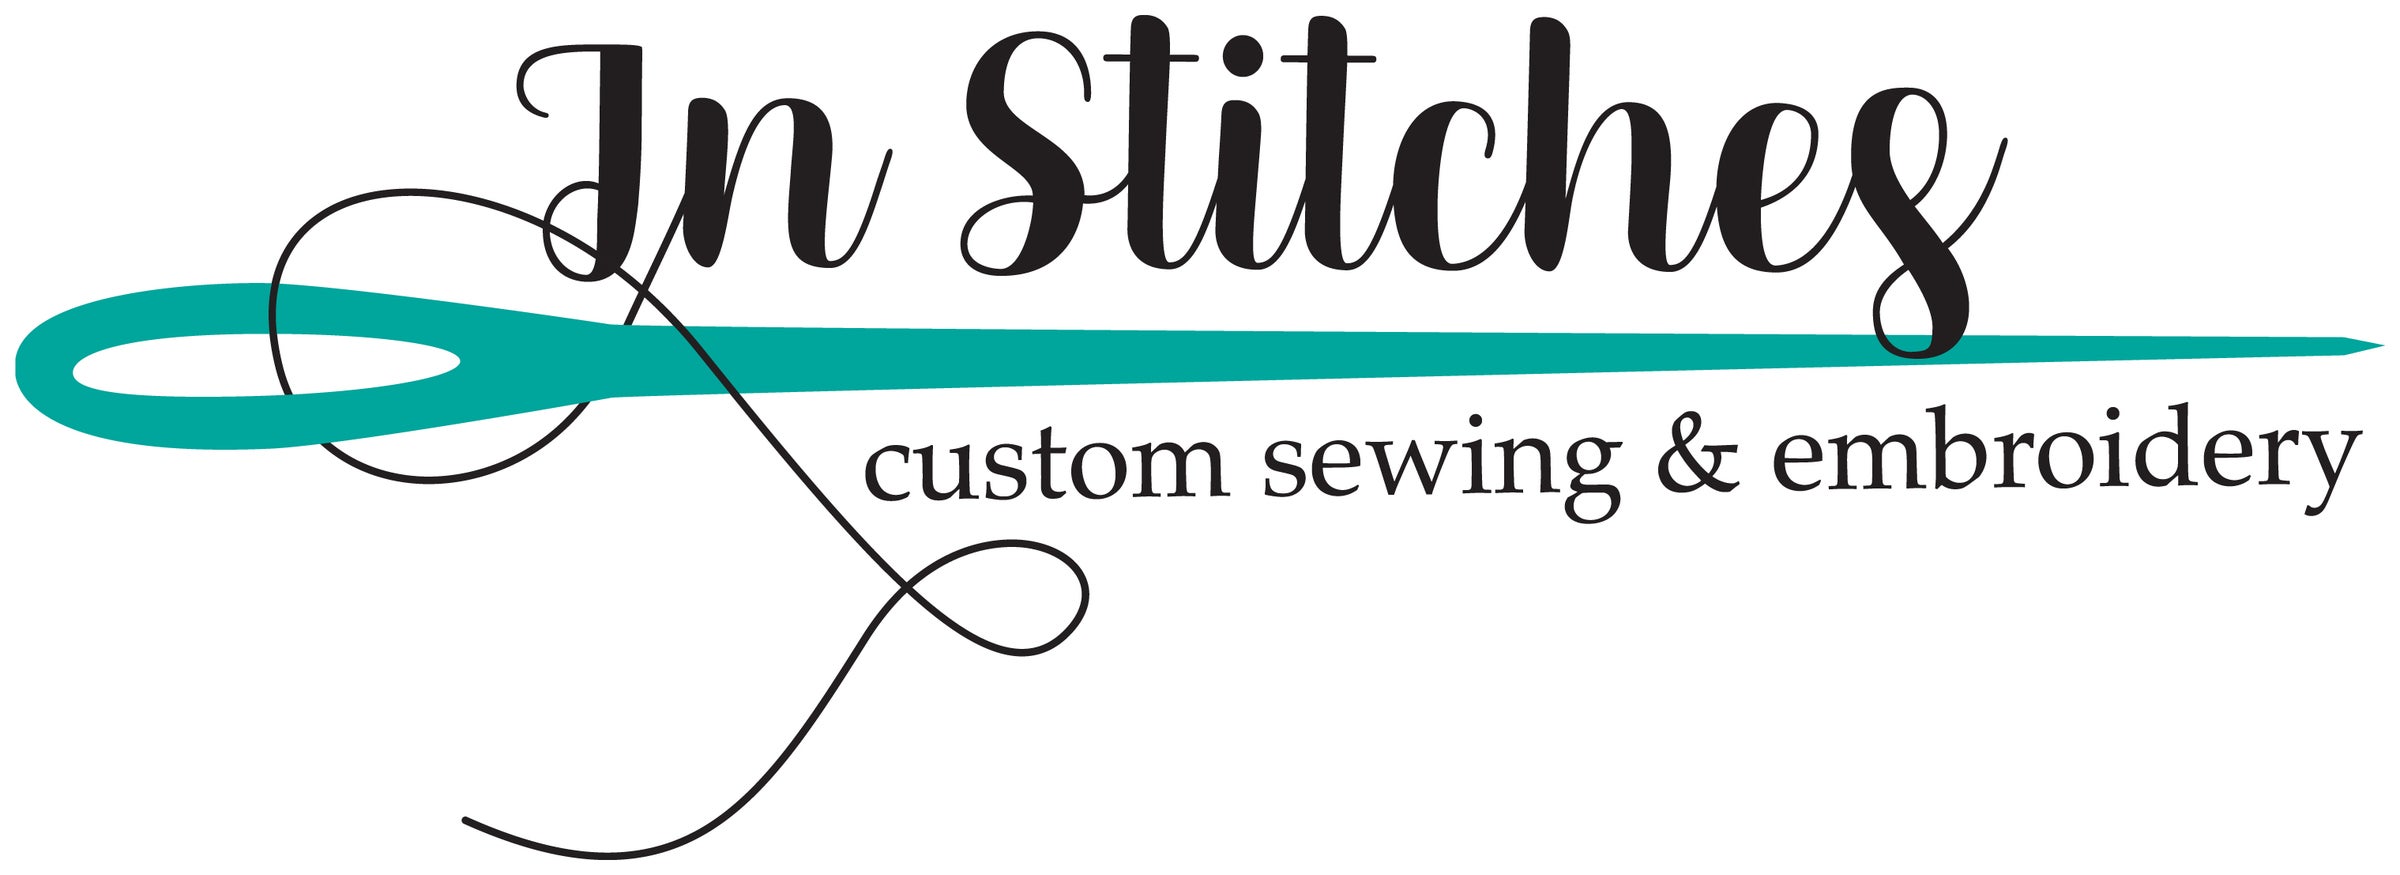 Youth Clothing Construction: Girls Clothing | In Stitches